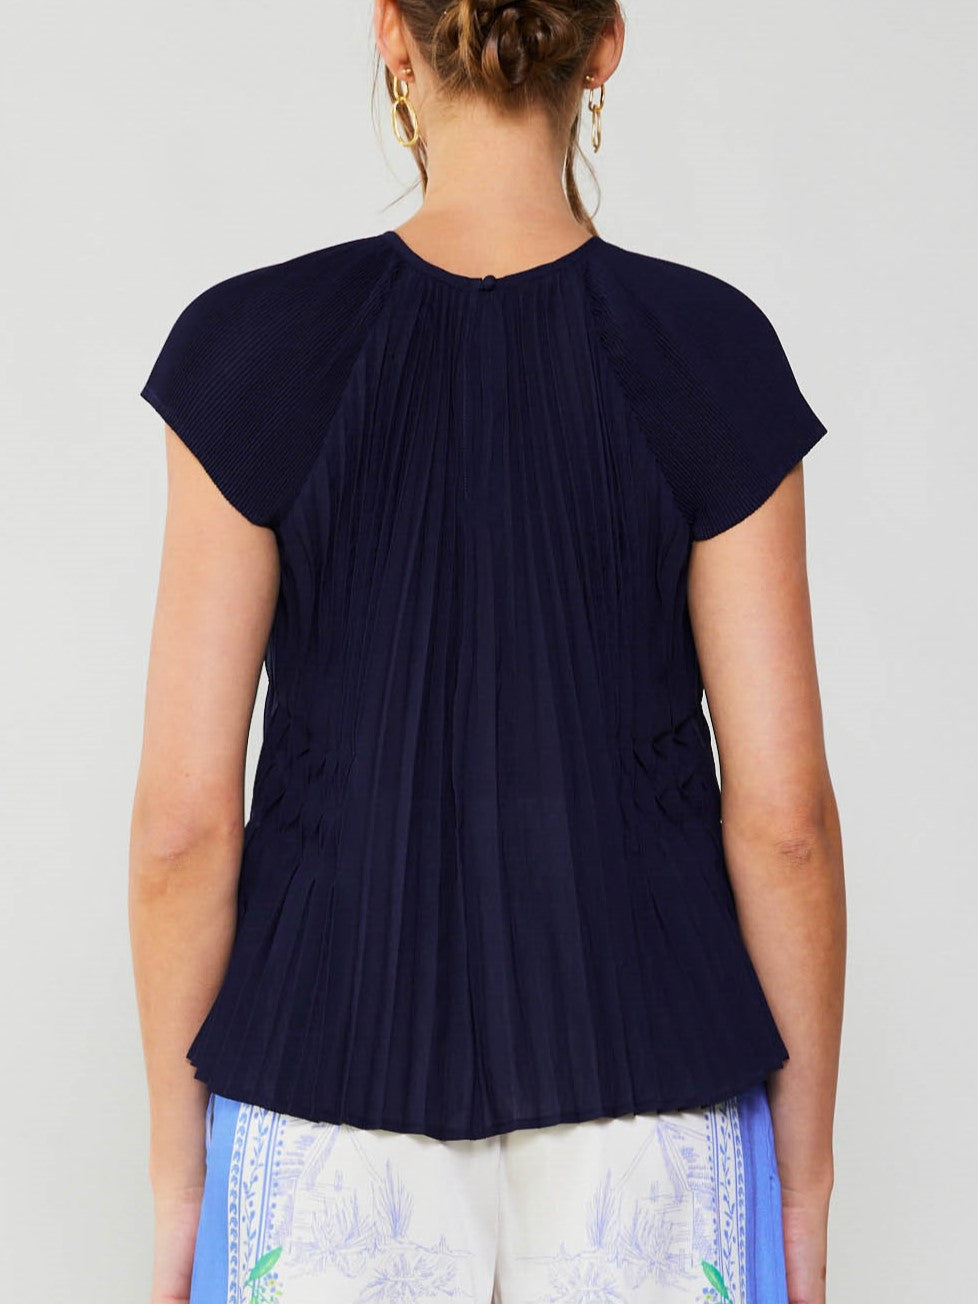 Current Air Pleated Detail Navy Top